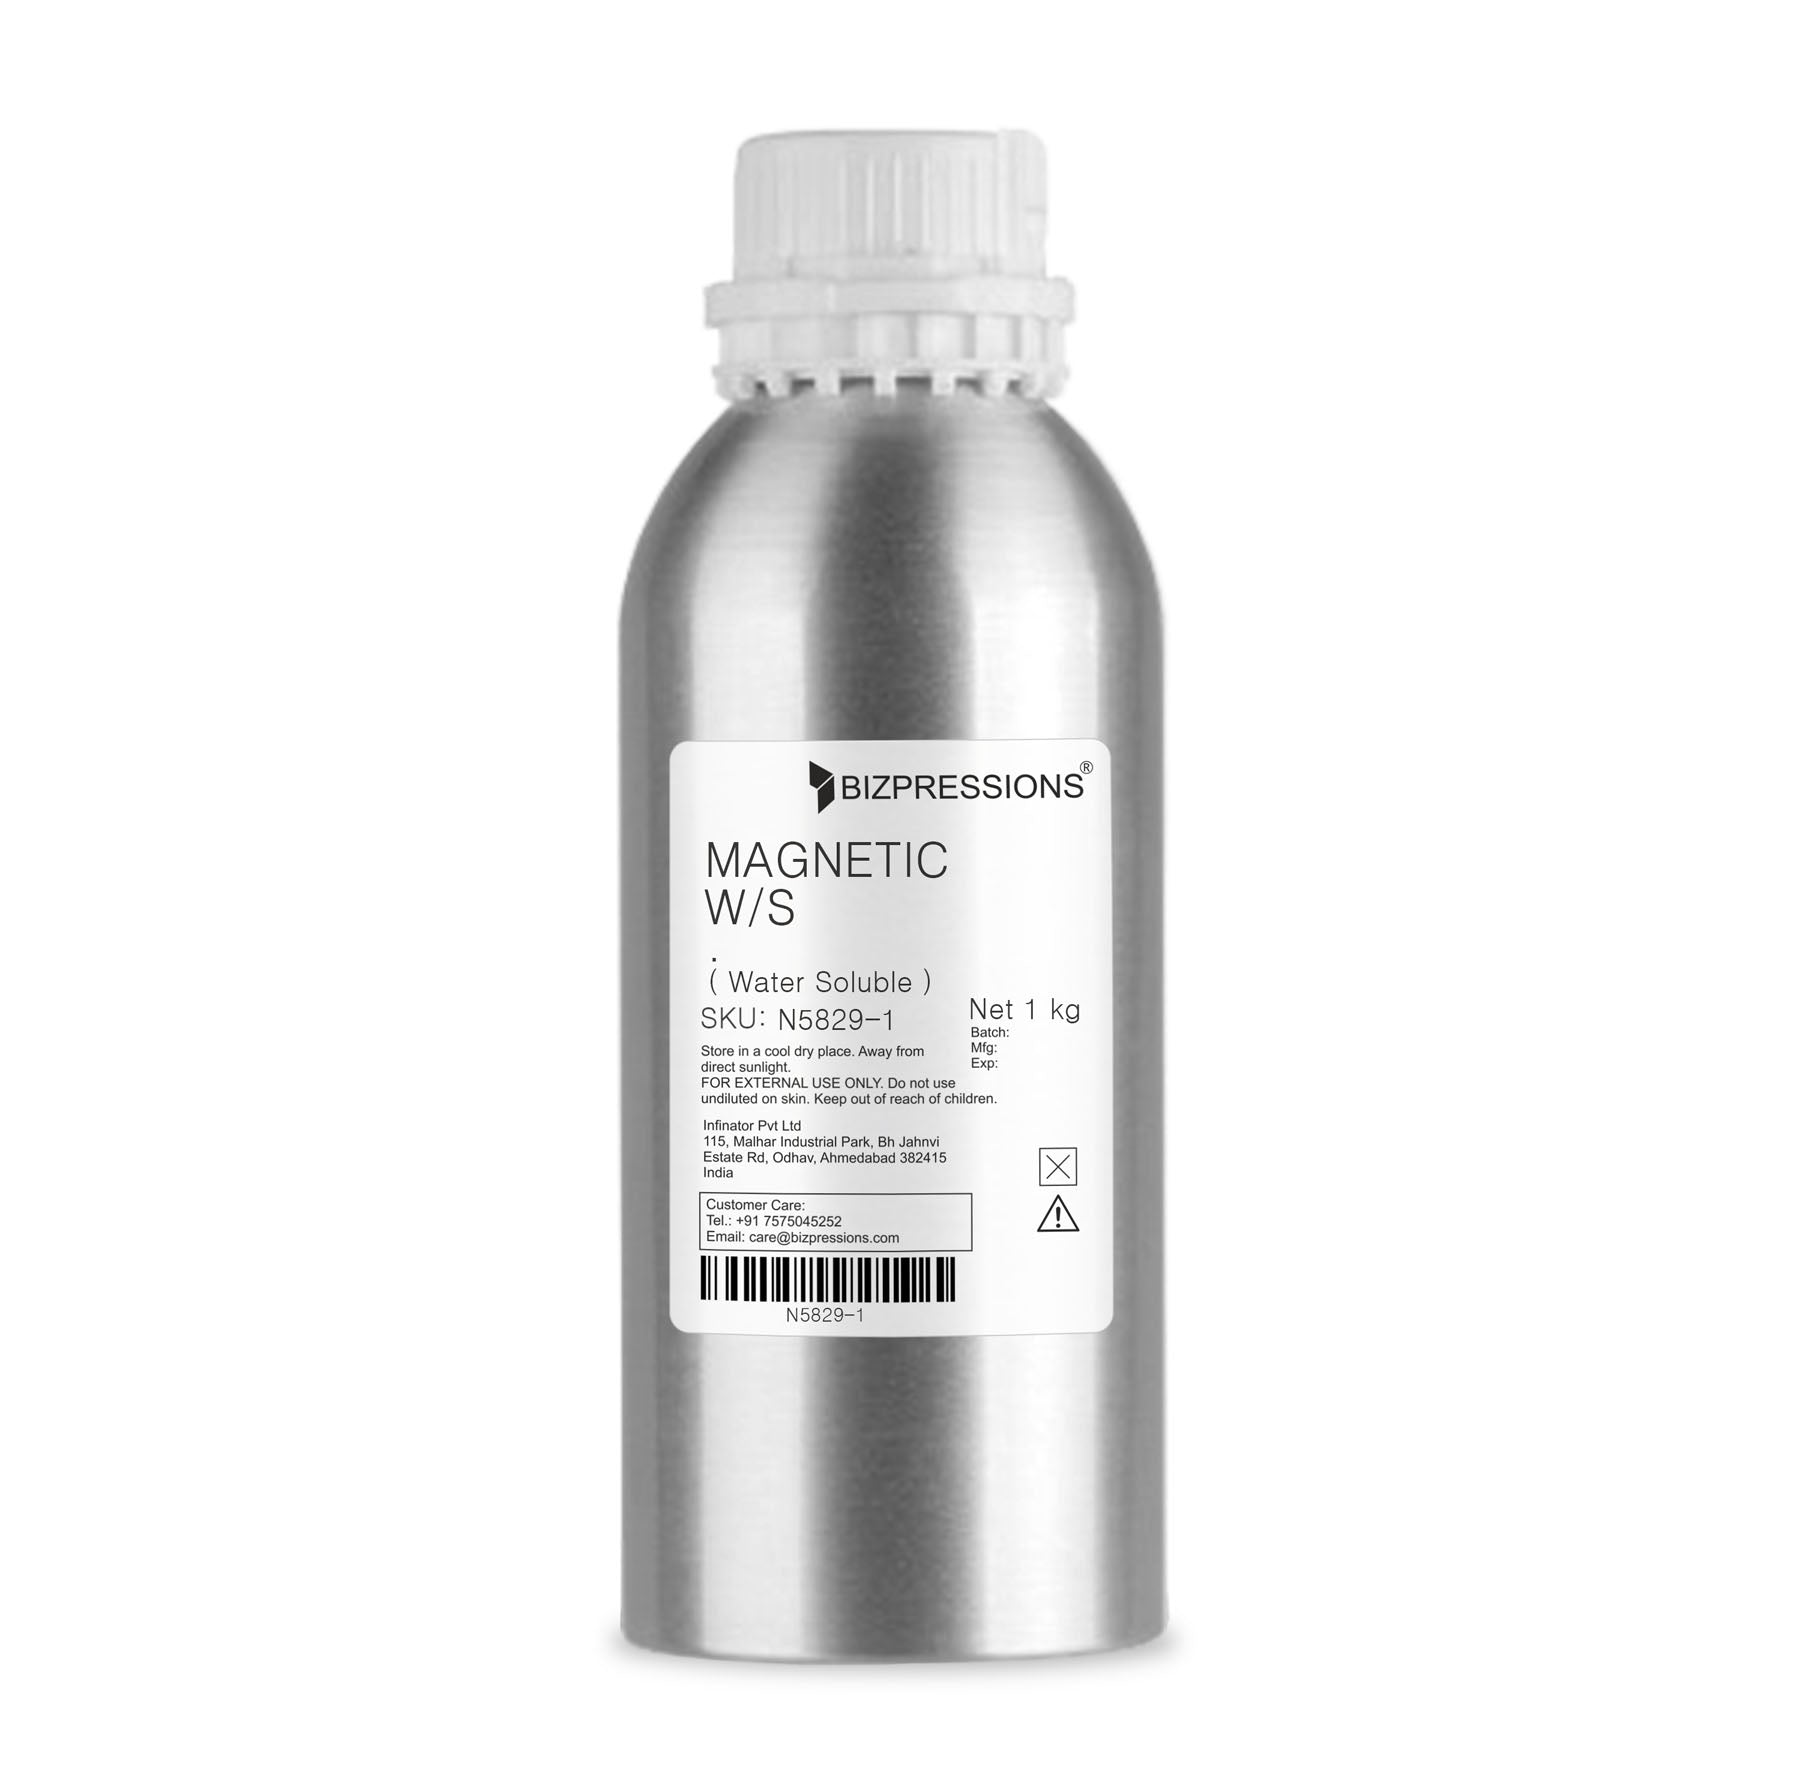 MAGNETIC W/S - Fragrance ( Water Soluble ) - 1 kg